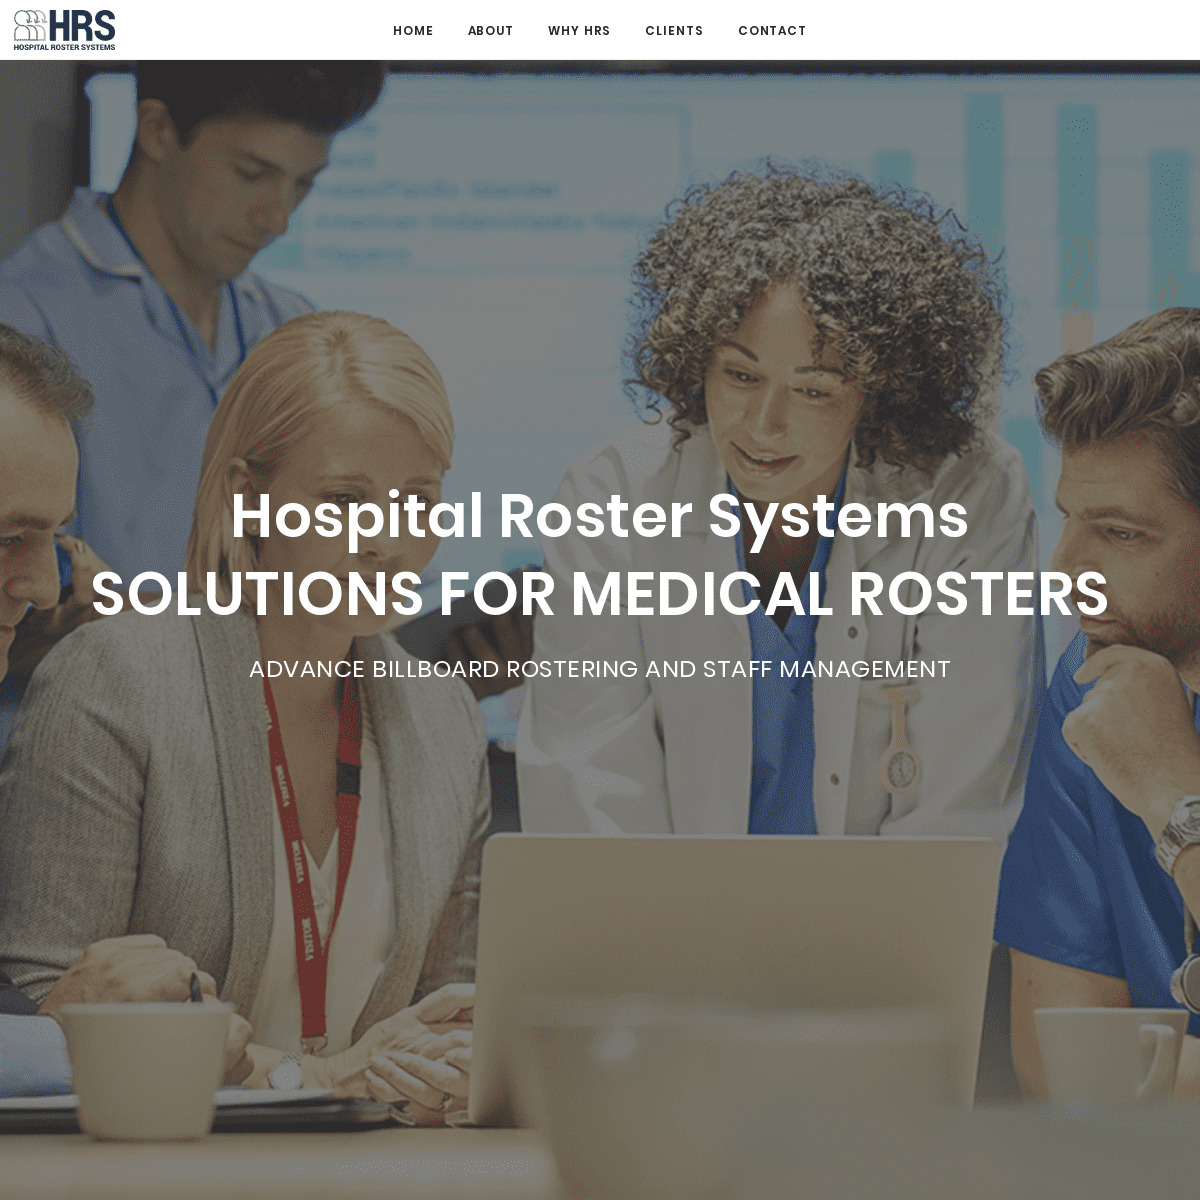 HRS - Advanced Billboard & Rostering System Designed Specifically for Medical Industry